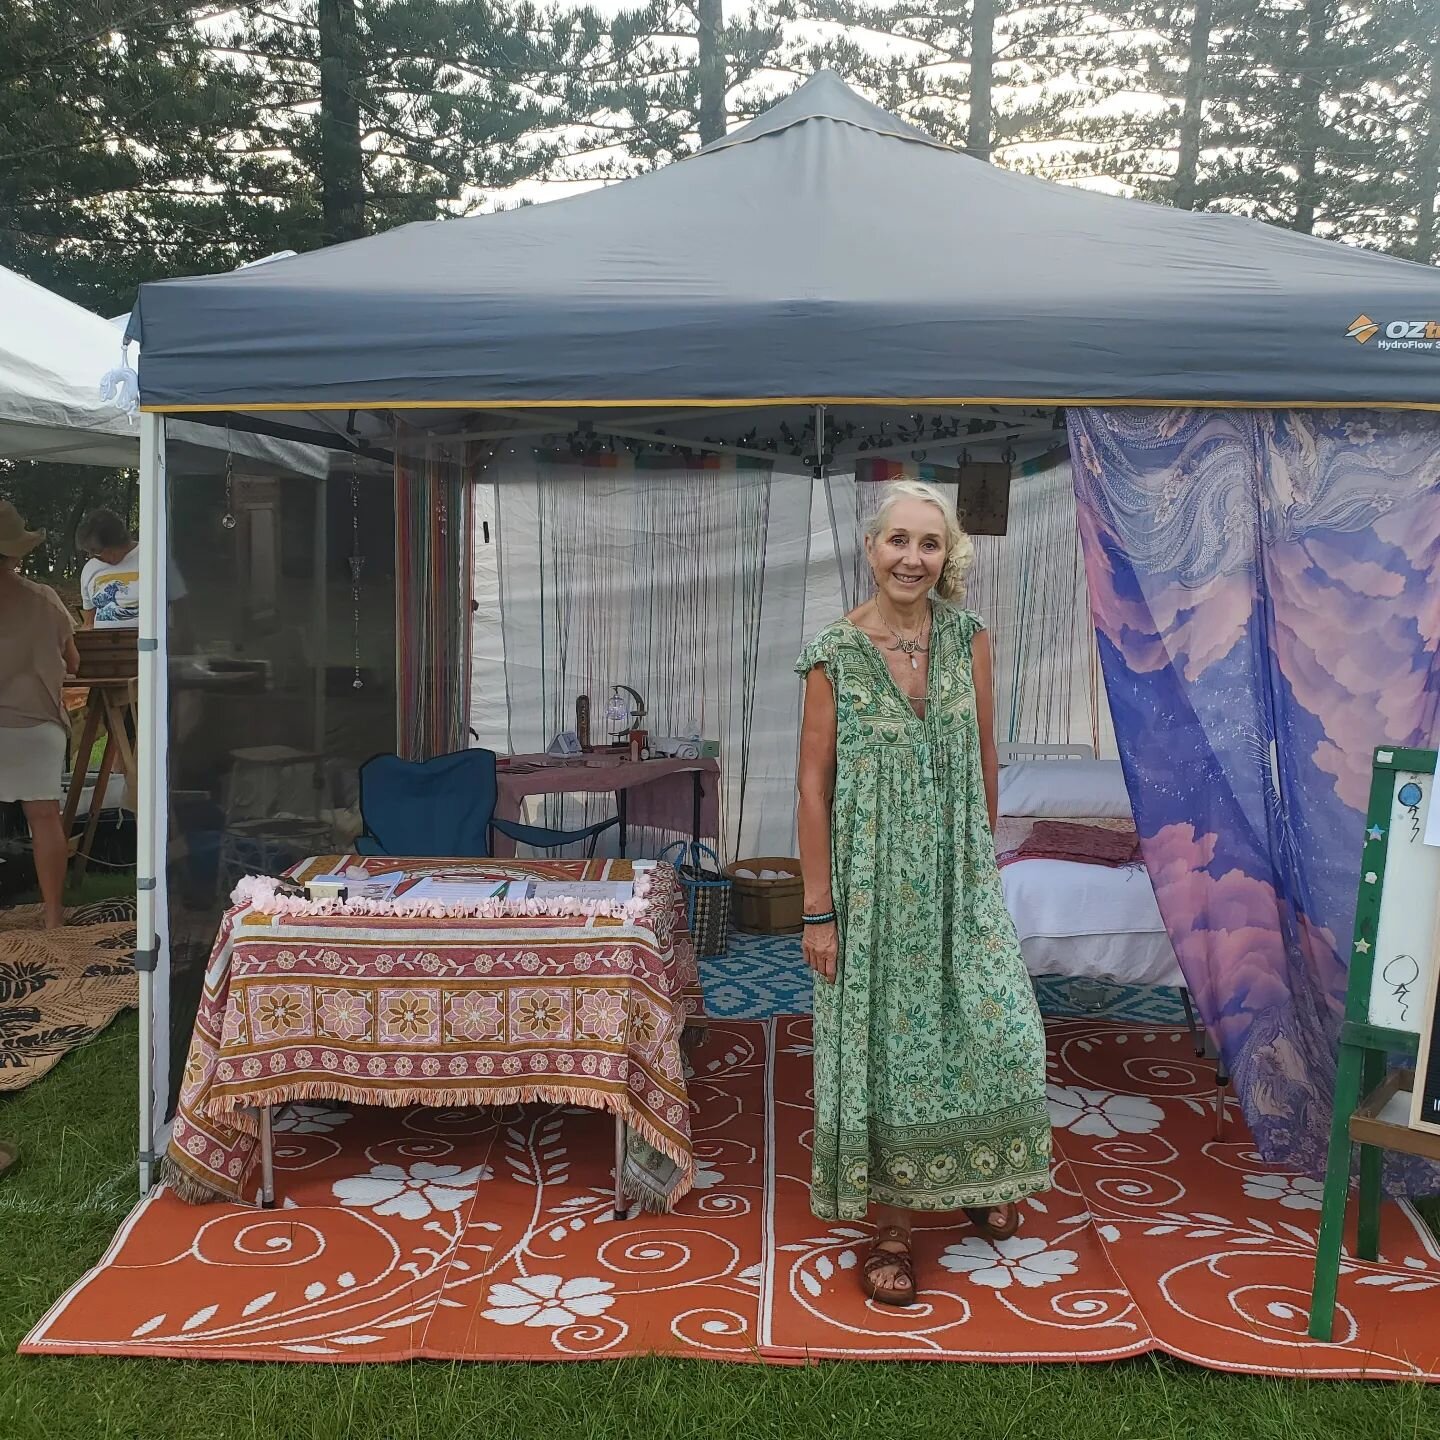 Come and say hello tomorrow at Byron beachside markets #spell #spellcuratorsclub #facialemotionaltherapy #reiki #healingjourney #byronbay #womeninbusiness #womensupportingwomen